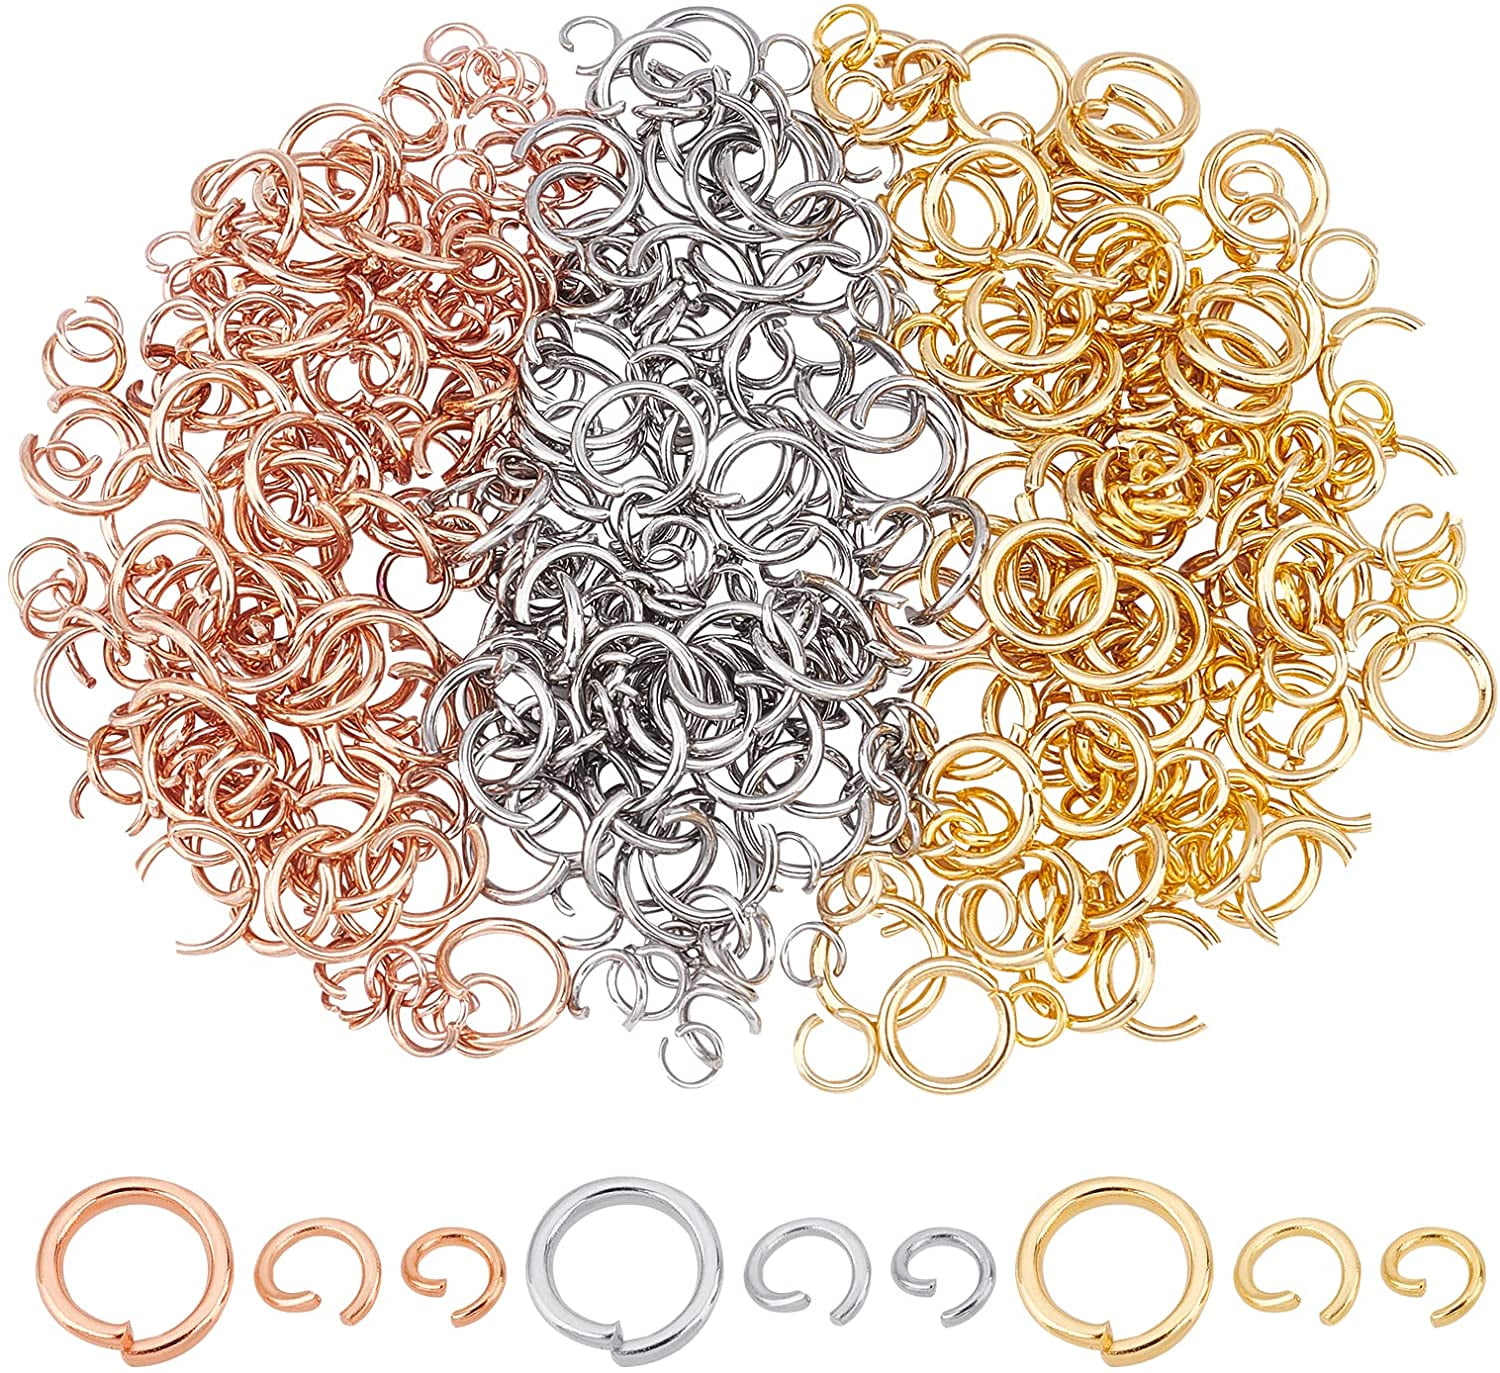 Uxcell Open Jump Rings, 8mm Colorful O-Ring Connectors for DIY Crafts, Orange, 160Pack, Women's, Size: Small